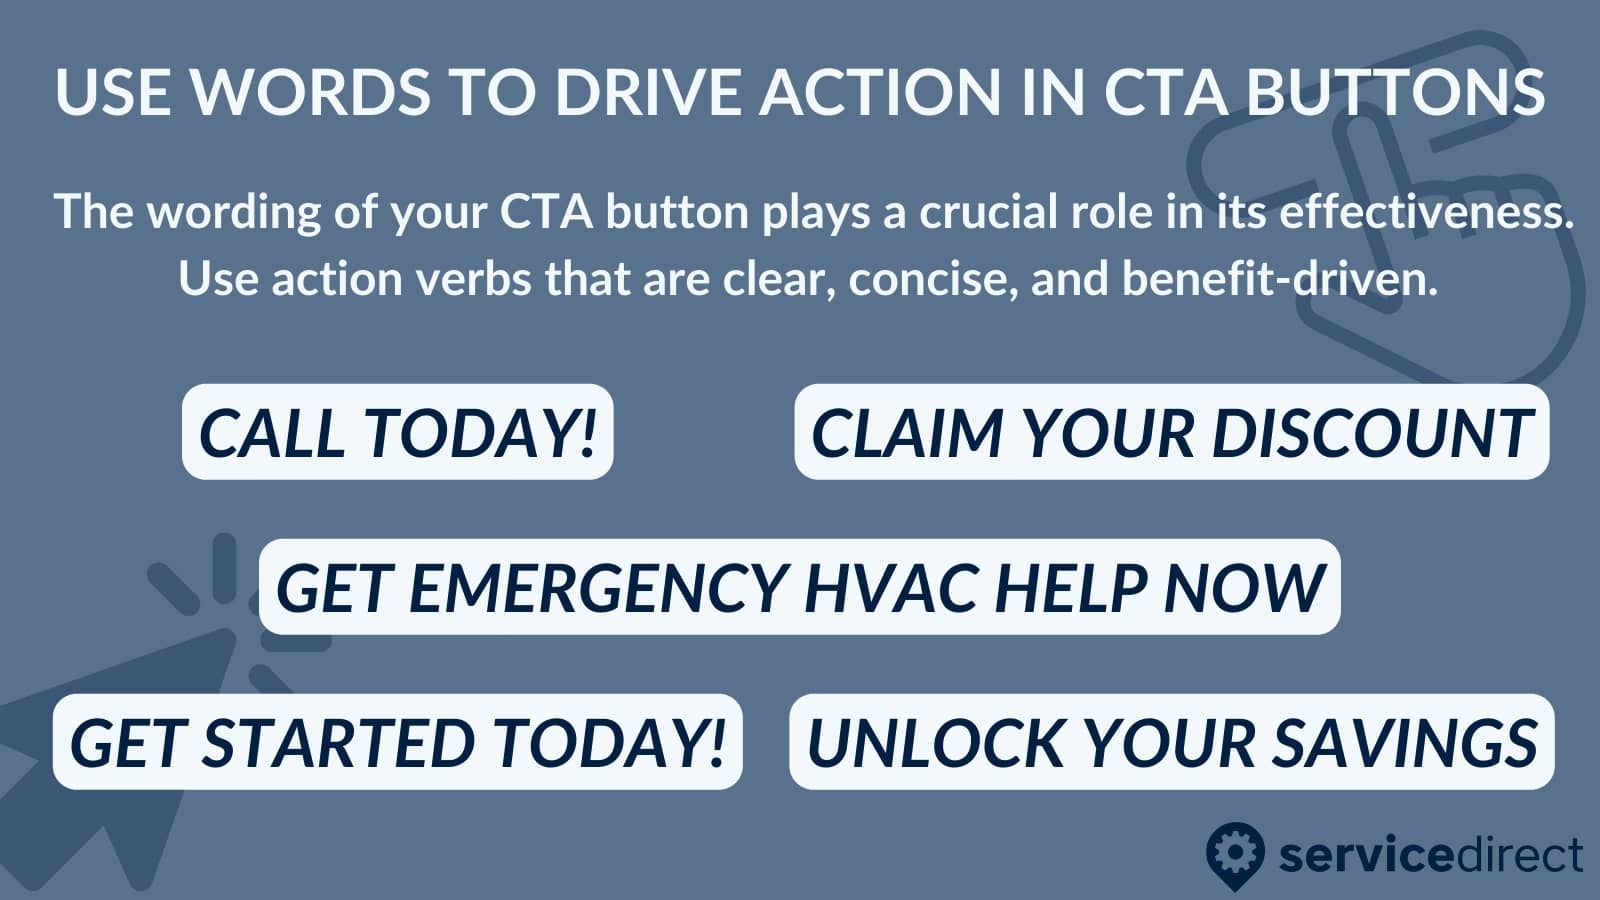 Use action words in your CTAs such as call today and claim your discount to increase conversions. 